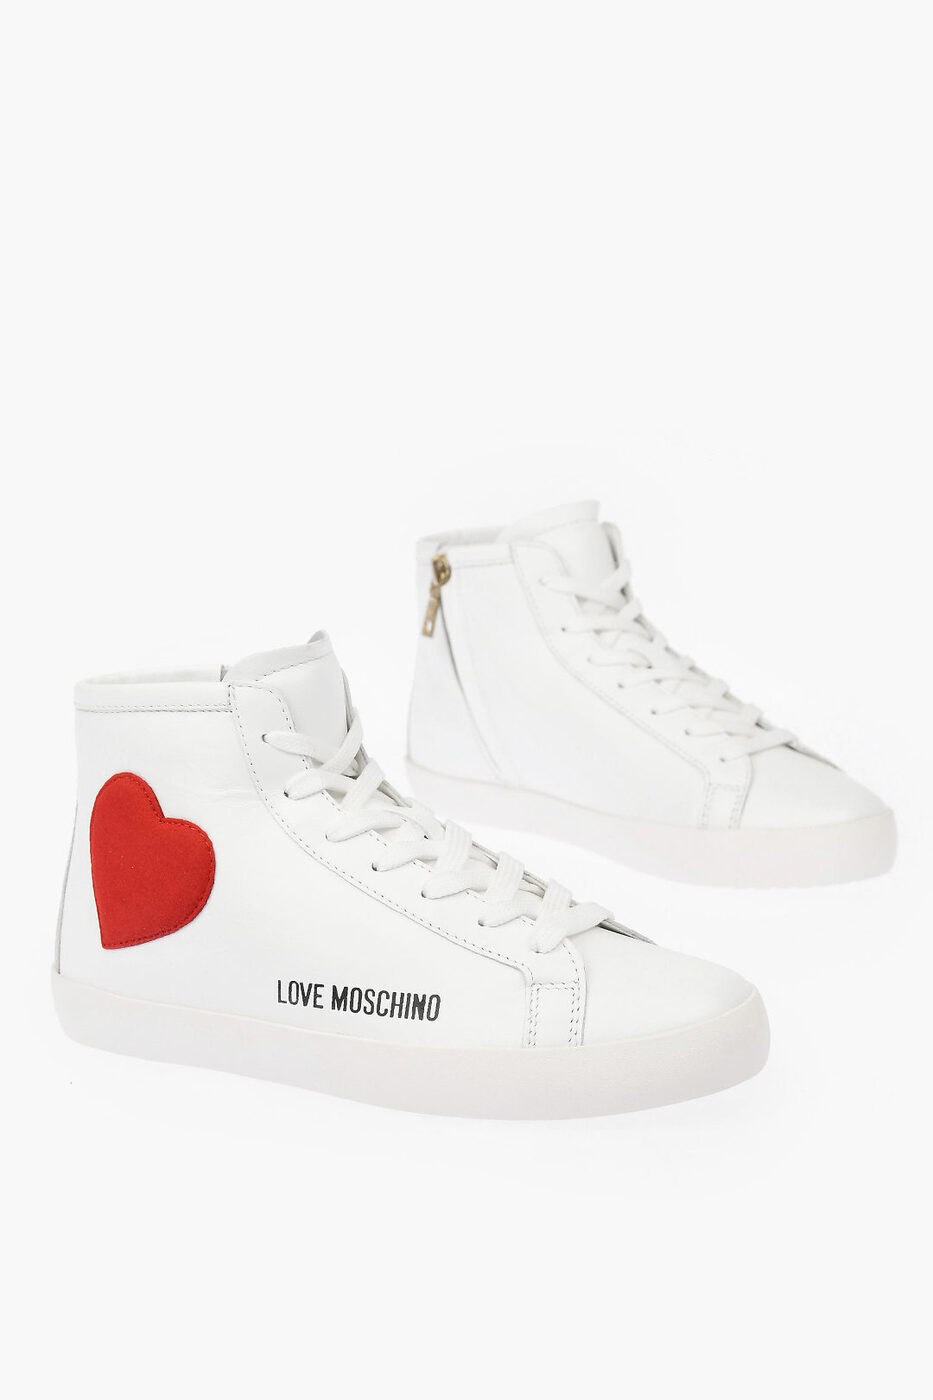 MOSCHINO モスキーノ スニーカー JA15412G1EI4410A レディース LOVE LEATHER HIGH TOP SNEAKERS WITH V..